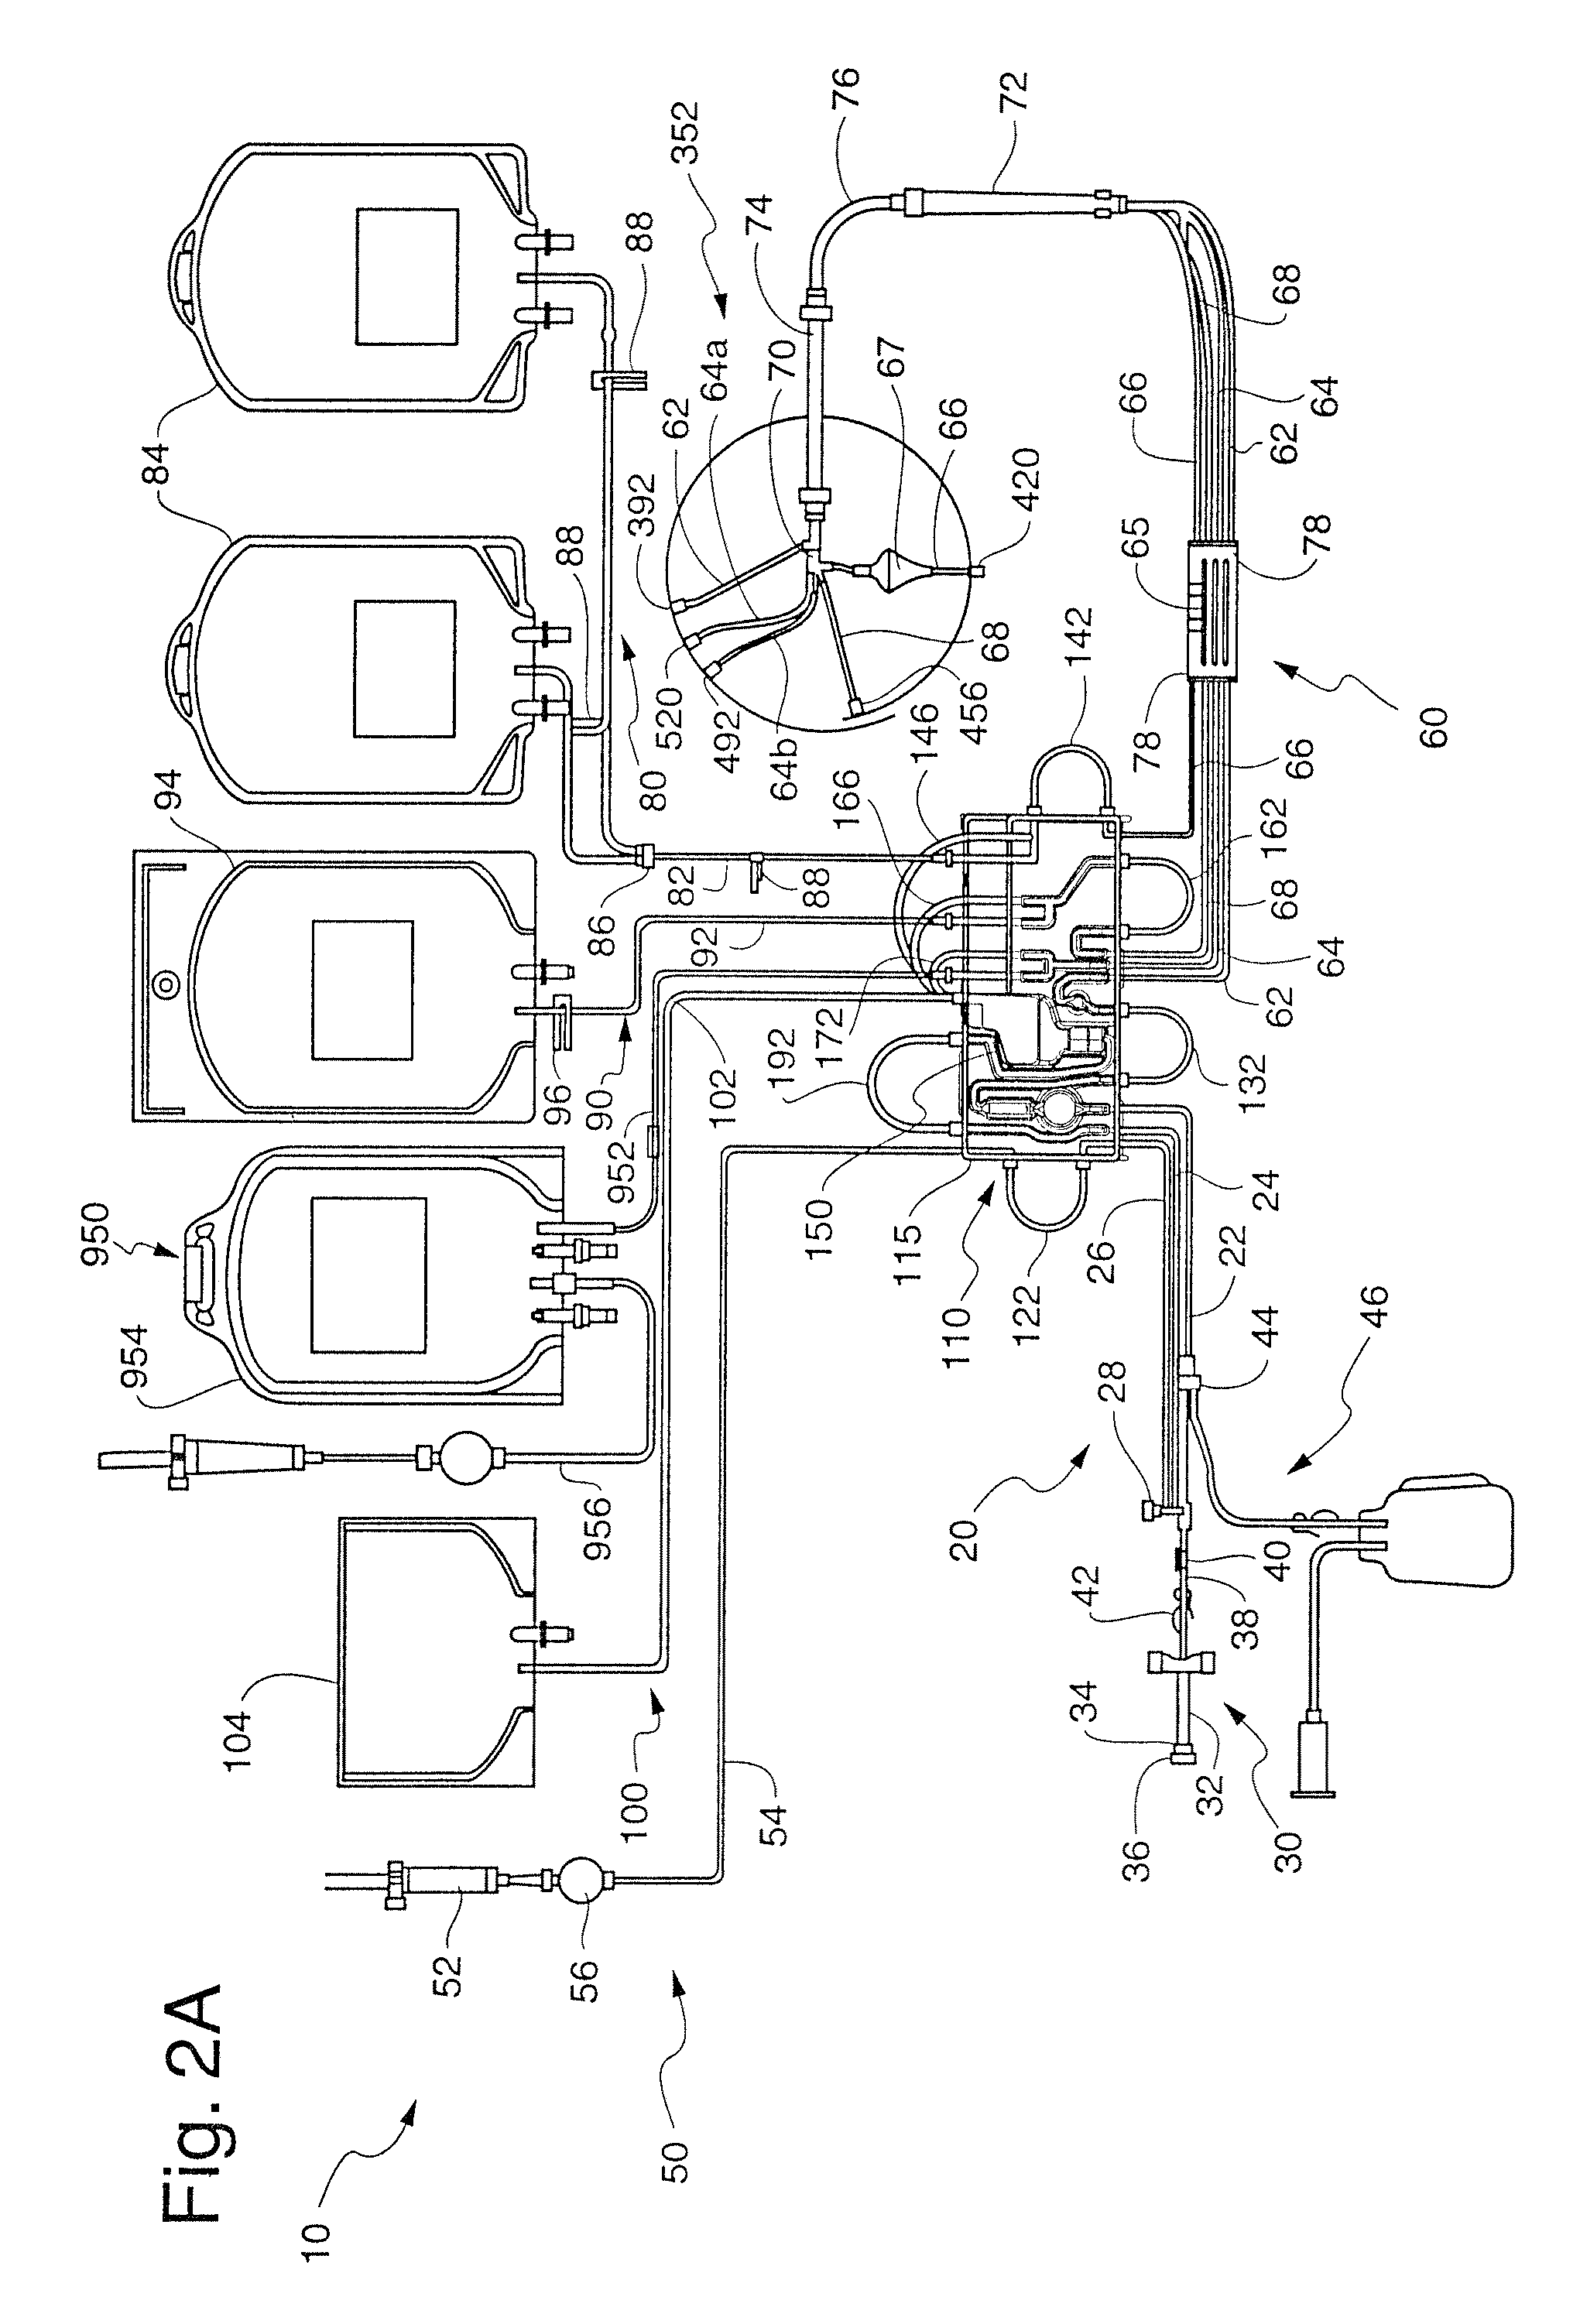 Extra-corporeal blood processing method and apparatus based on donor characteristics